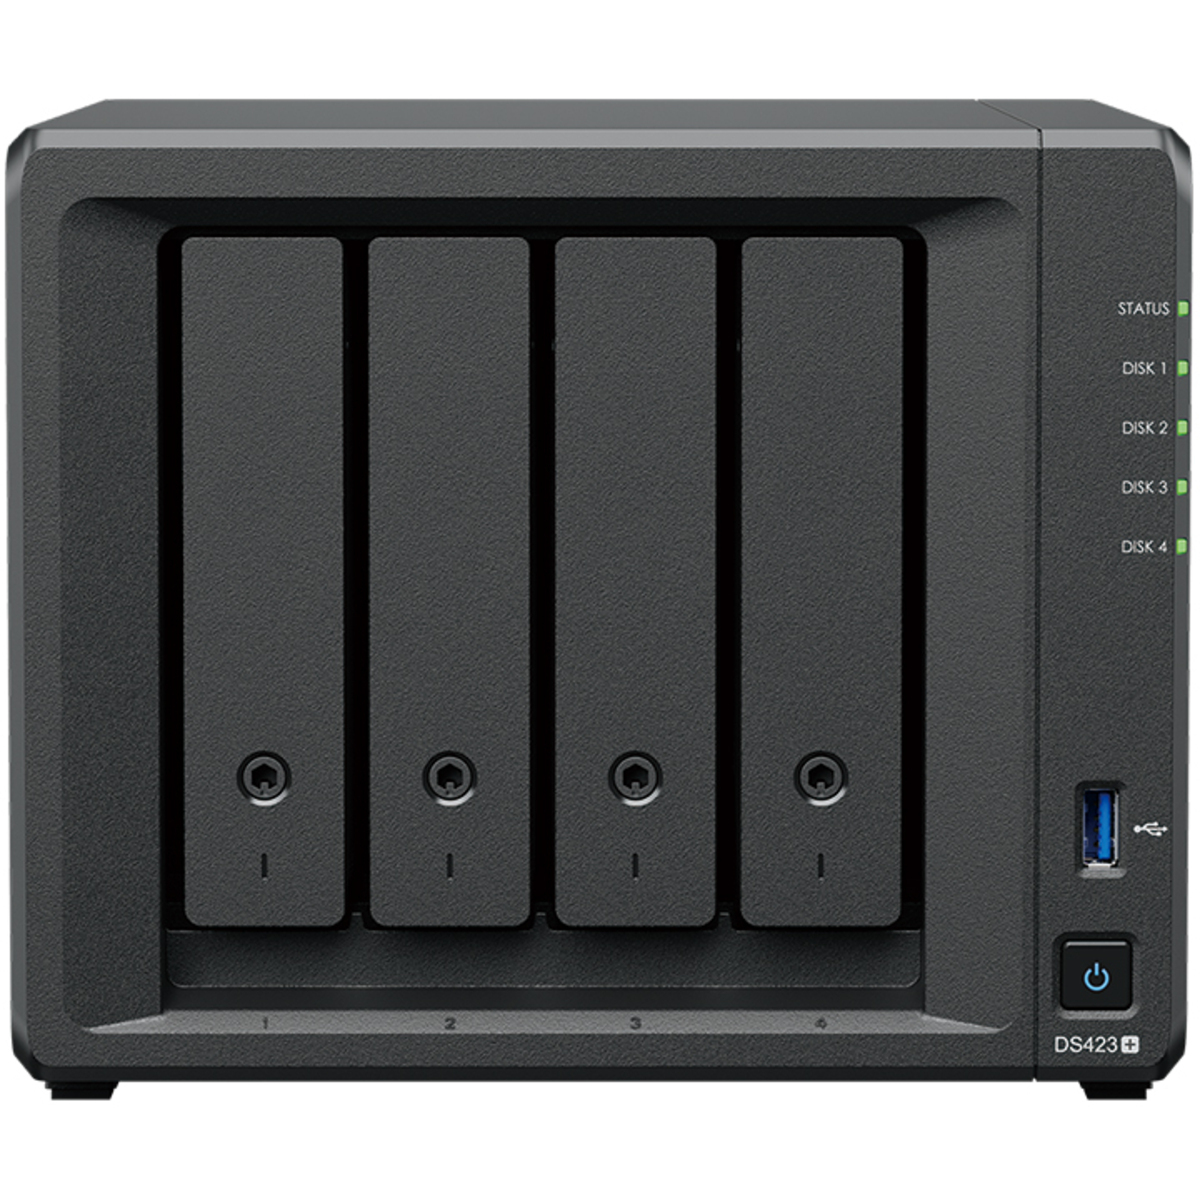 Synology DiskStation DS423+ 16tb 4-Bay Desktop Multimedia / Power User / Business NAS - Network Attached Storage Device 4x4tb Samsung 870 EVO MZ-77E4T0BAM 2.5 560/530MB/s SATA 6Gb/s SSD CONSUMER Class Drives Installed - Burn-In Tested - ON SALE - FREE RAM UPGRADE DiskStation DS423+